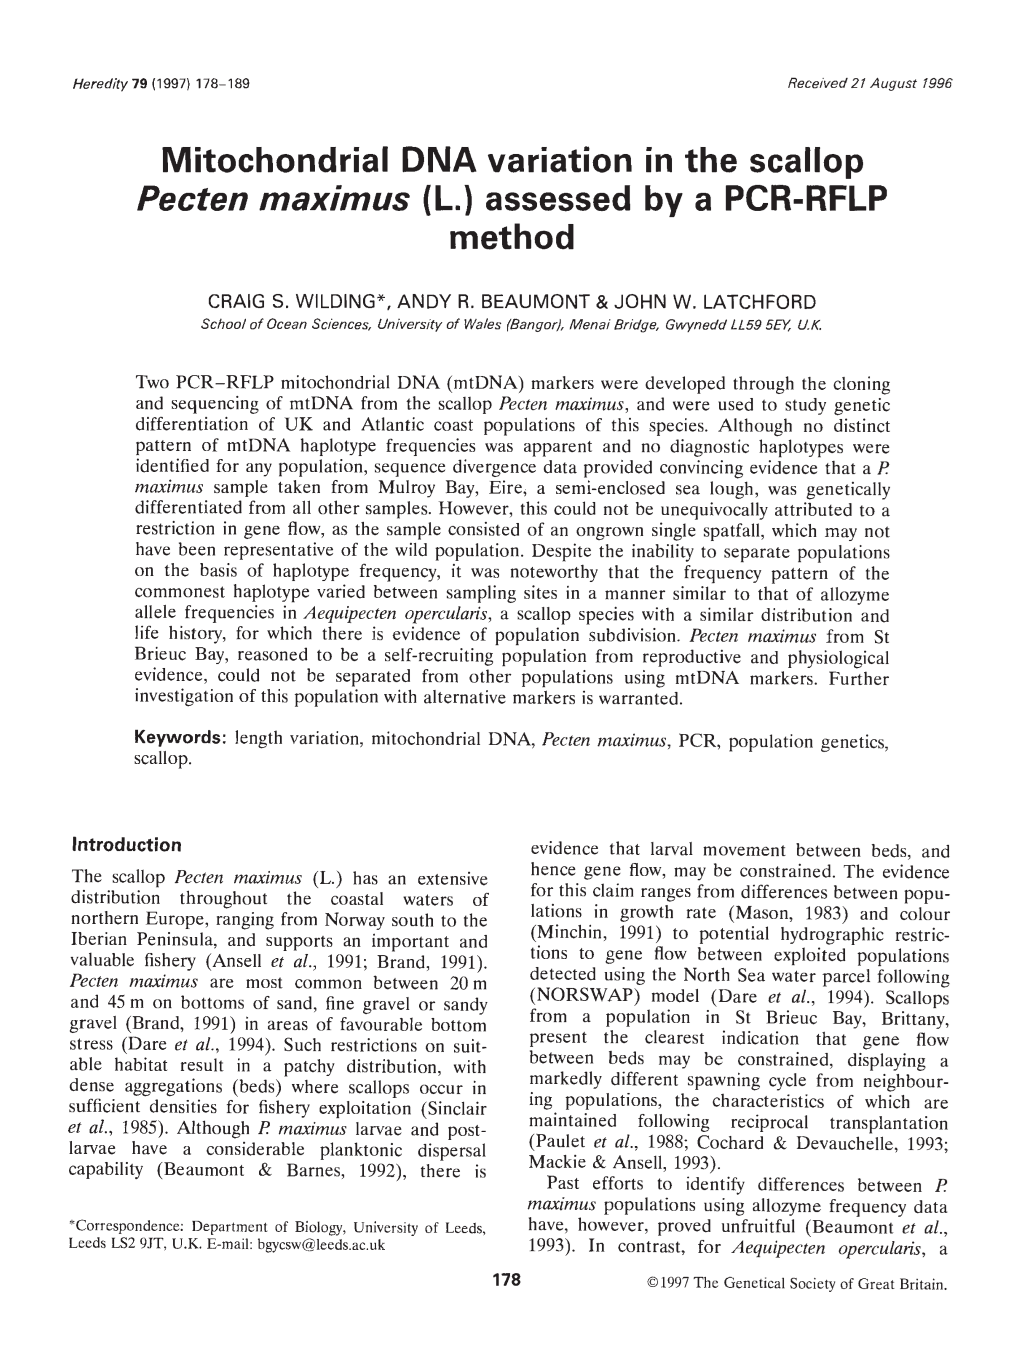 Mitochondrial DNA Variation in the Scallop Pecten Maximus (L.) Assessed by a PCR-RFLP Method